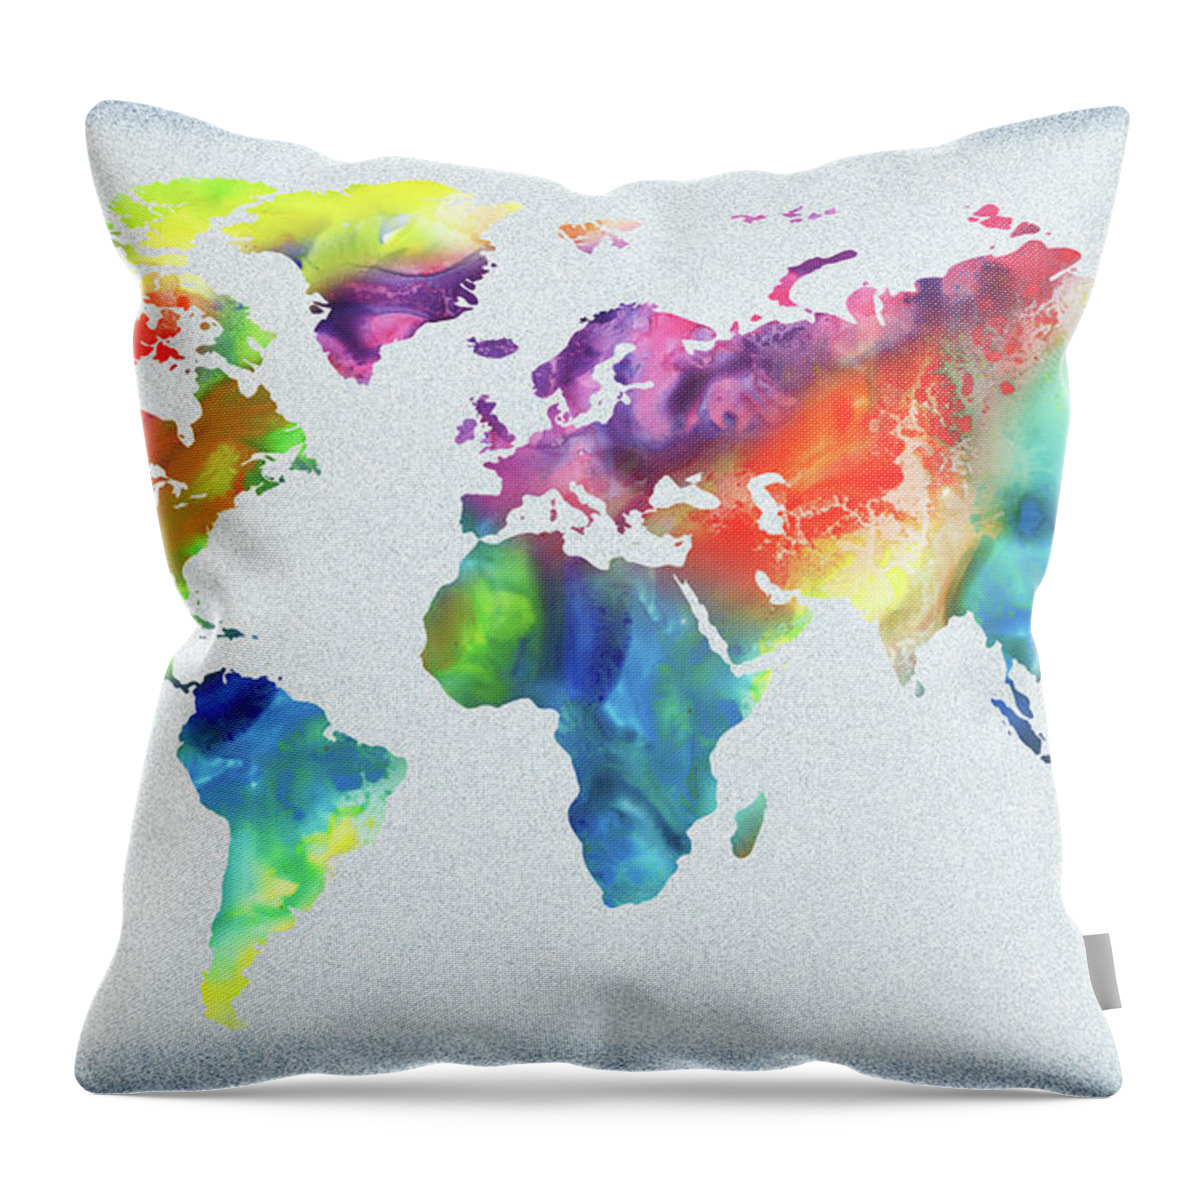 World Throw Pillow featuring the painting Vivid Watercolor Map Of The World by Irina Sztukowski